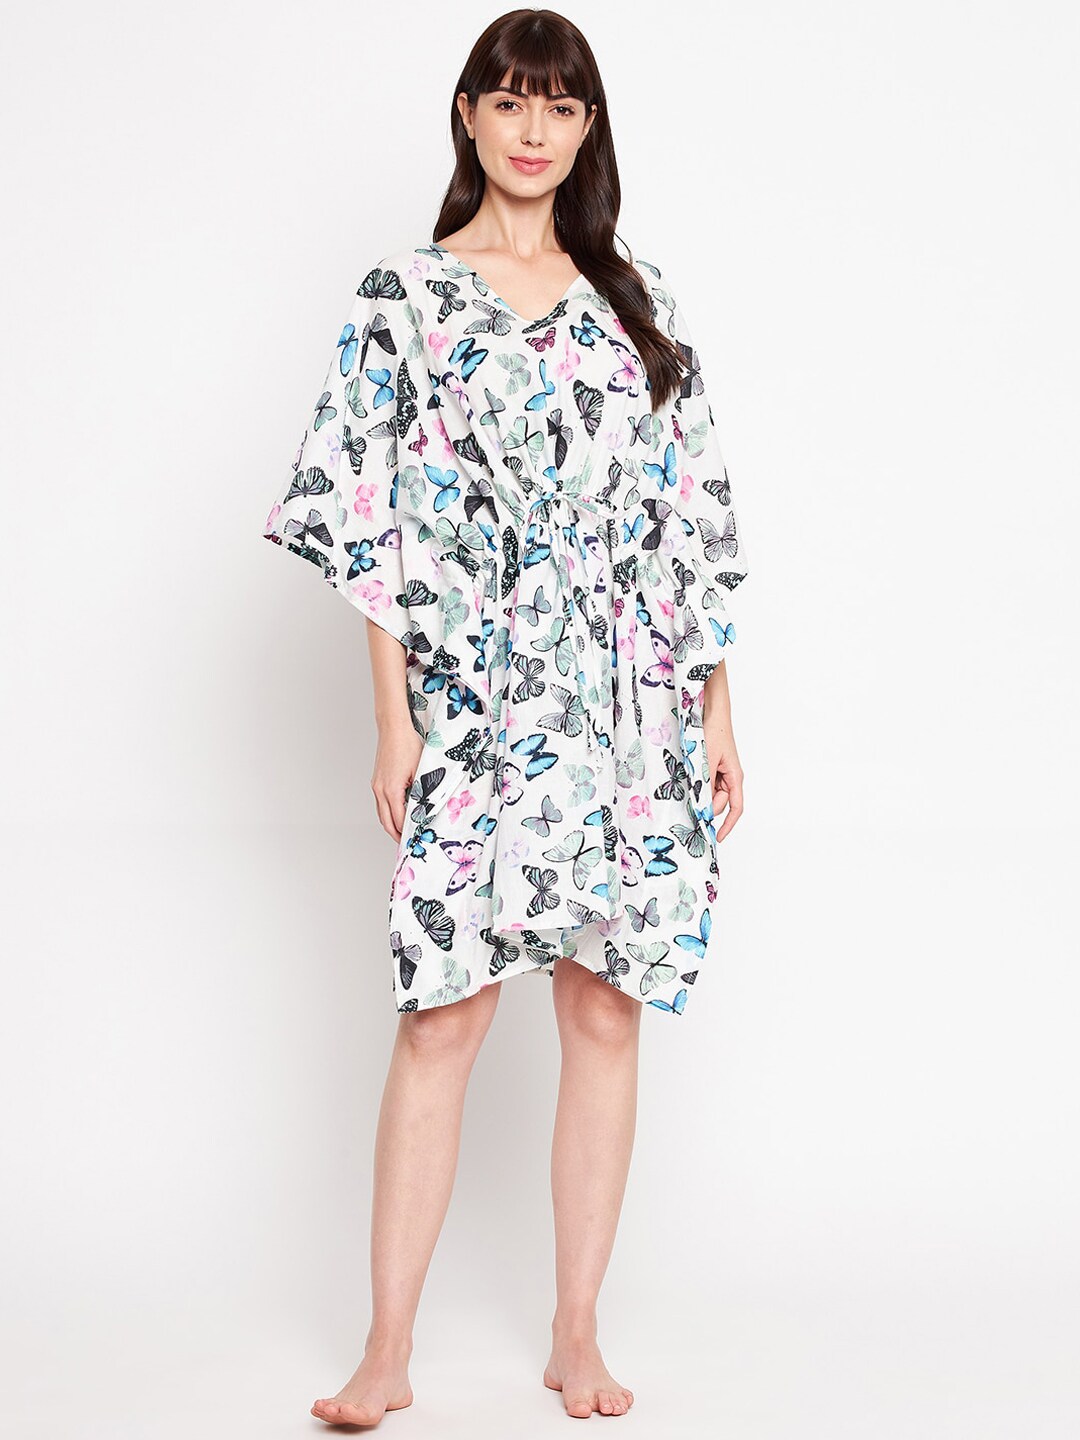 SECRETS BY ZEROKAATA Women White & Pink Printed Pure Cotton Kaftan Cover Up Dress Price in India